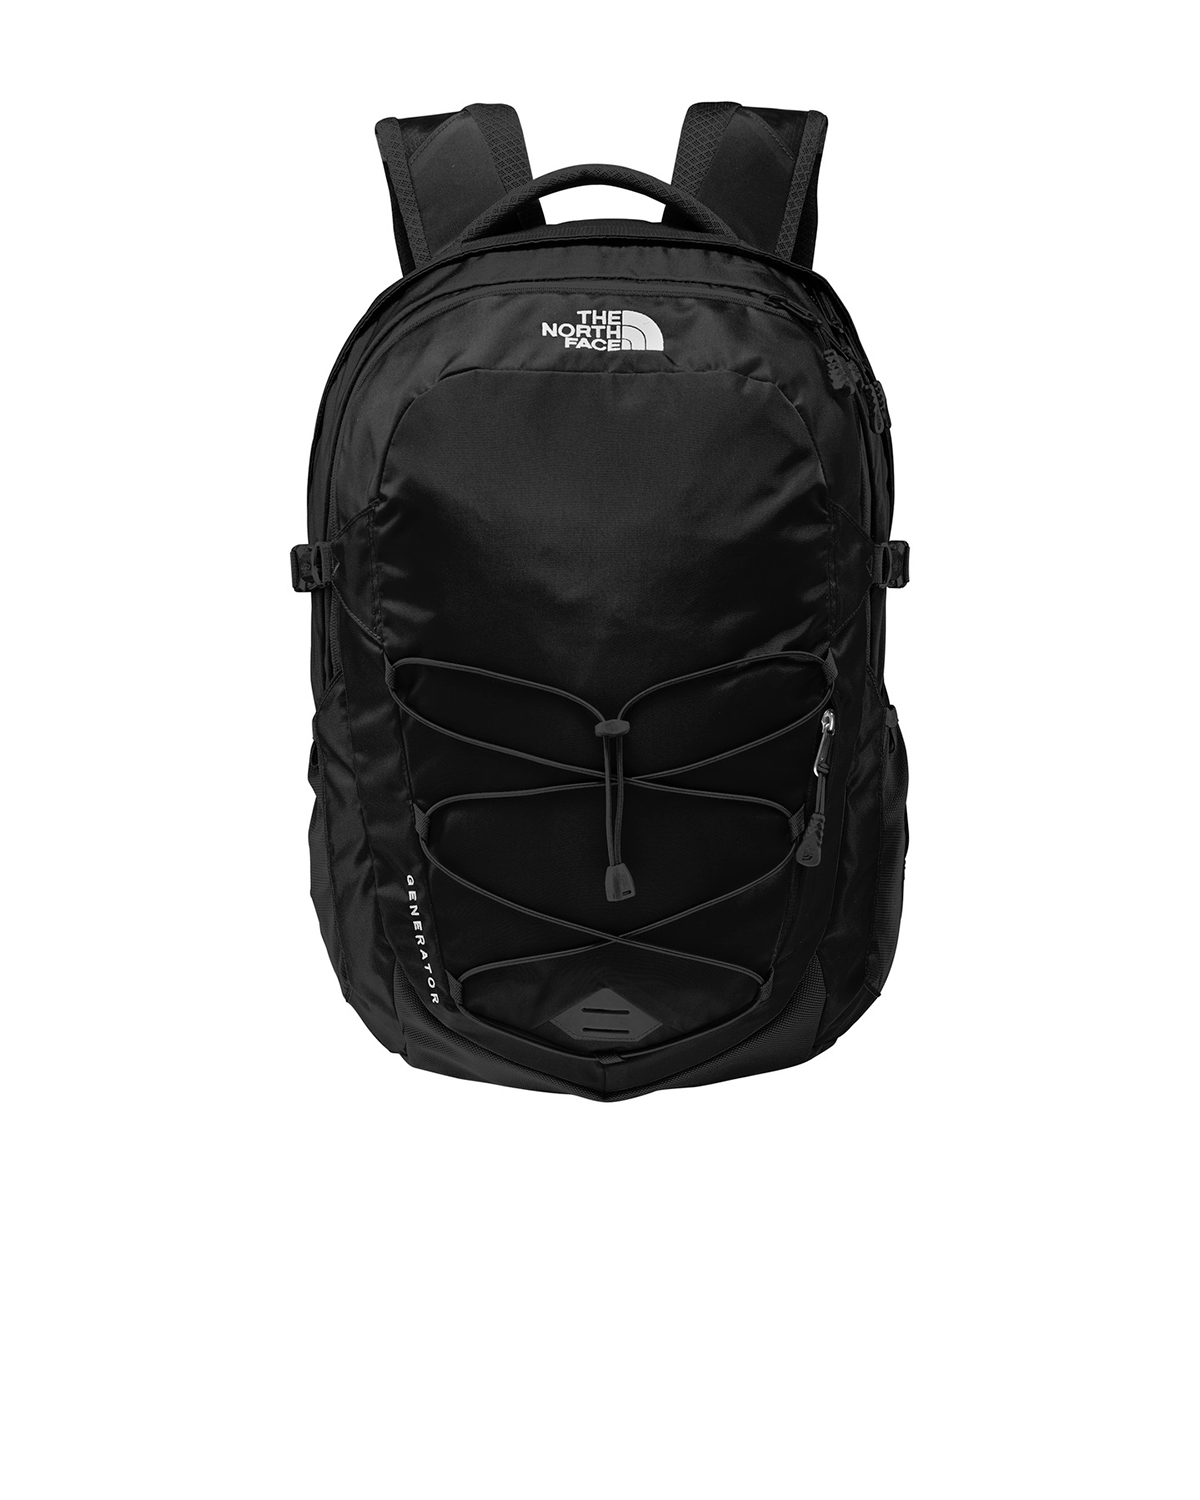 'The North Face NF0A3KX5 Generator Backpack'